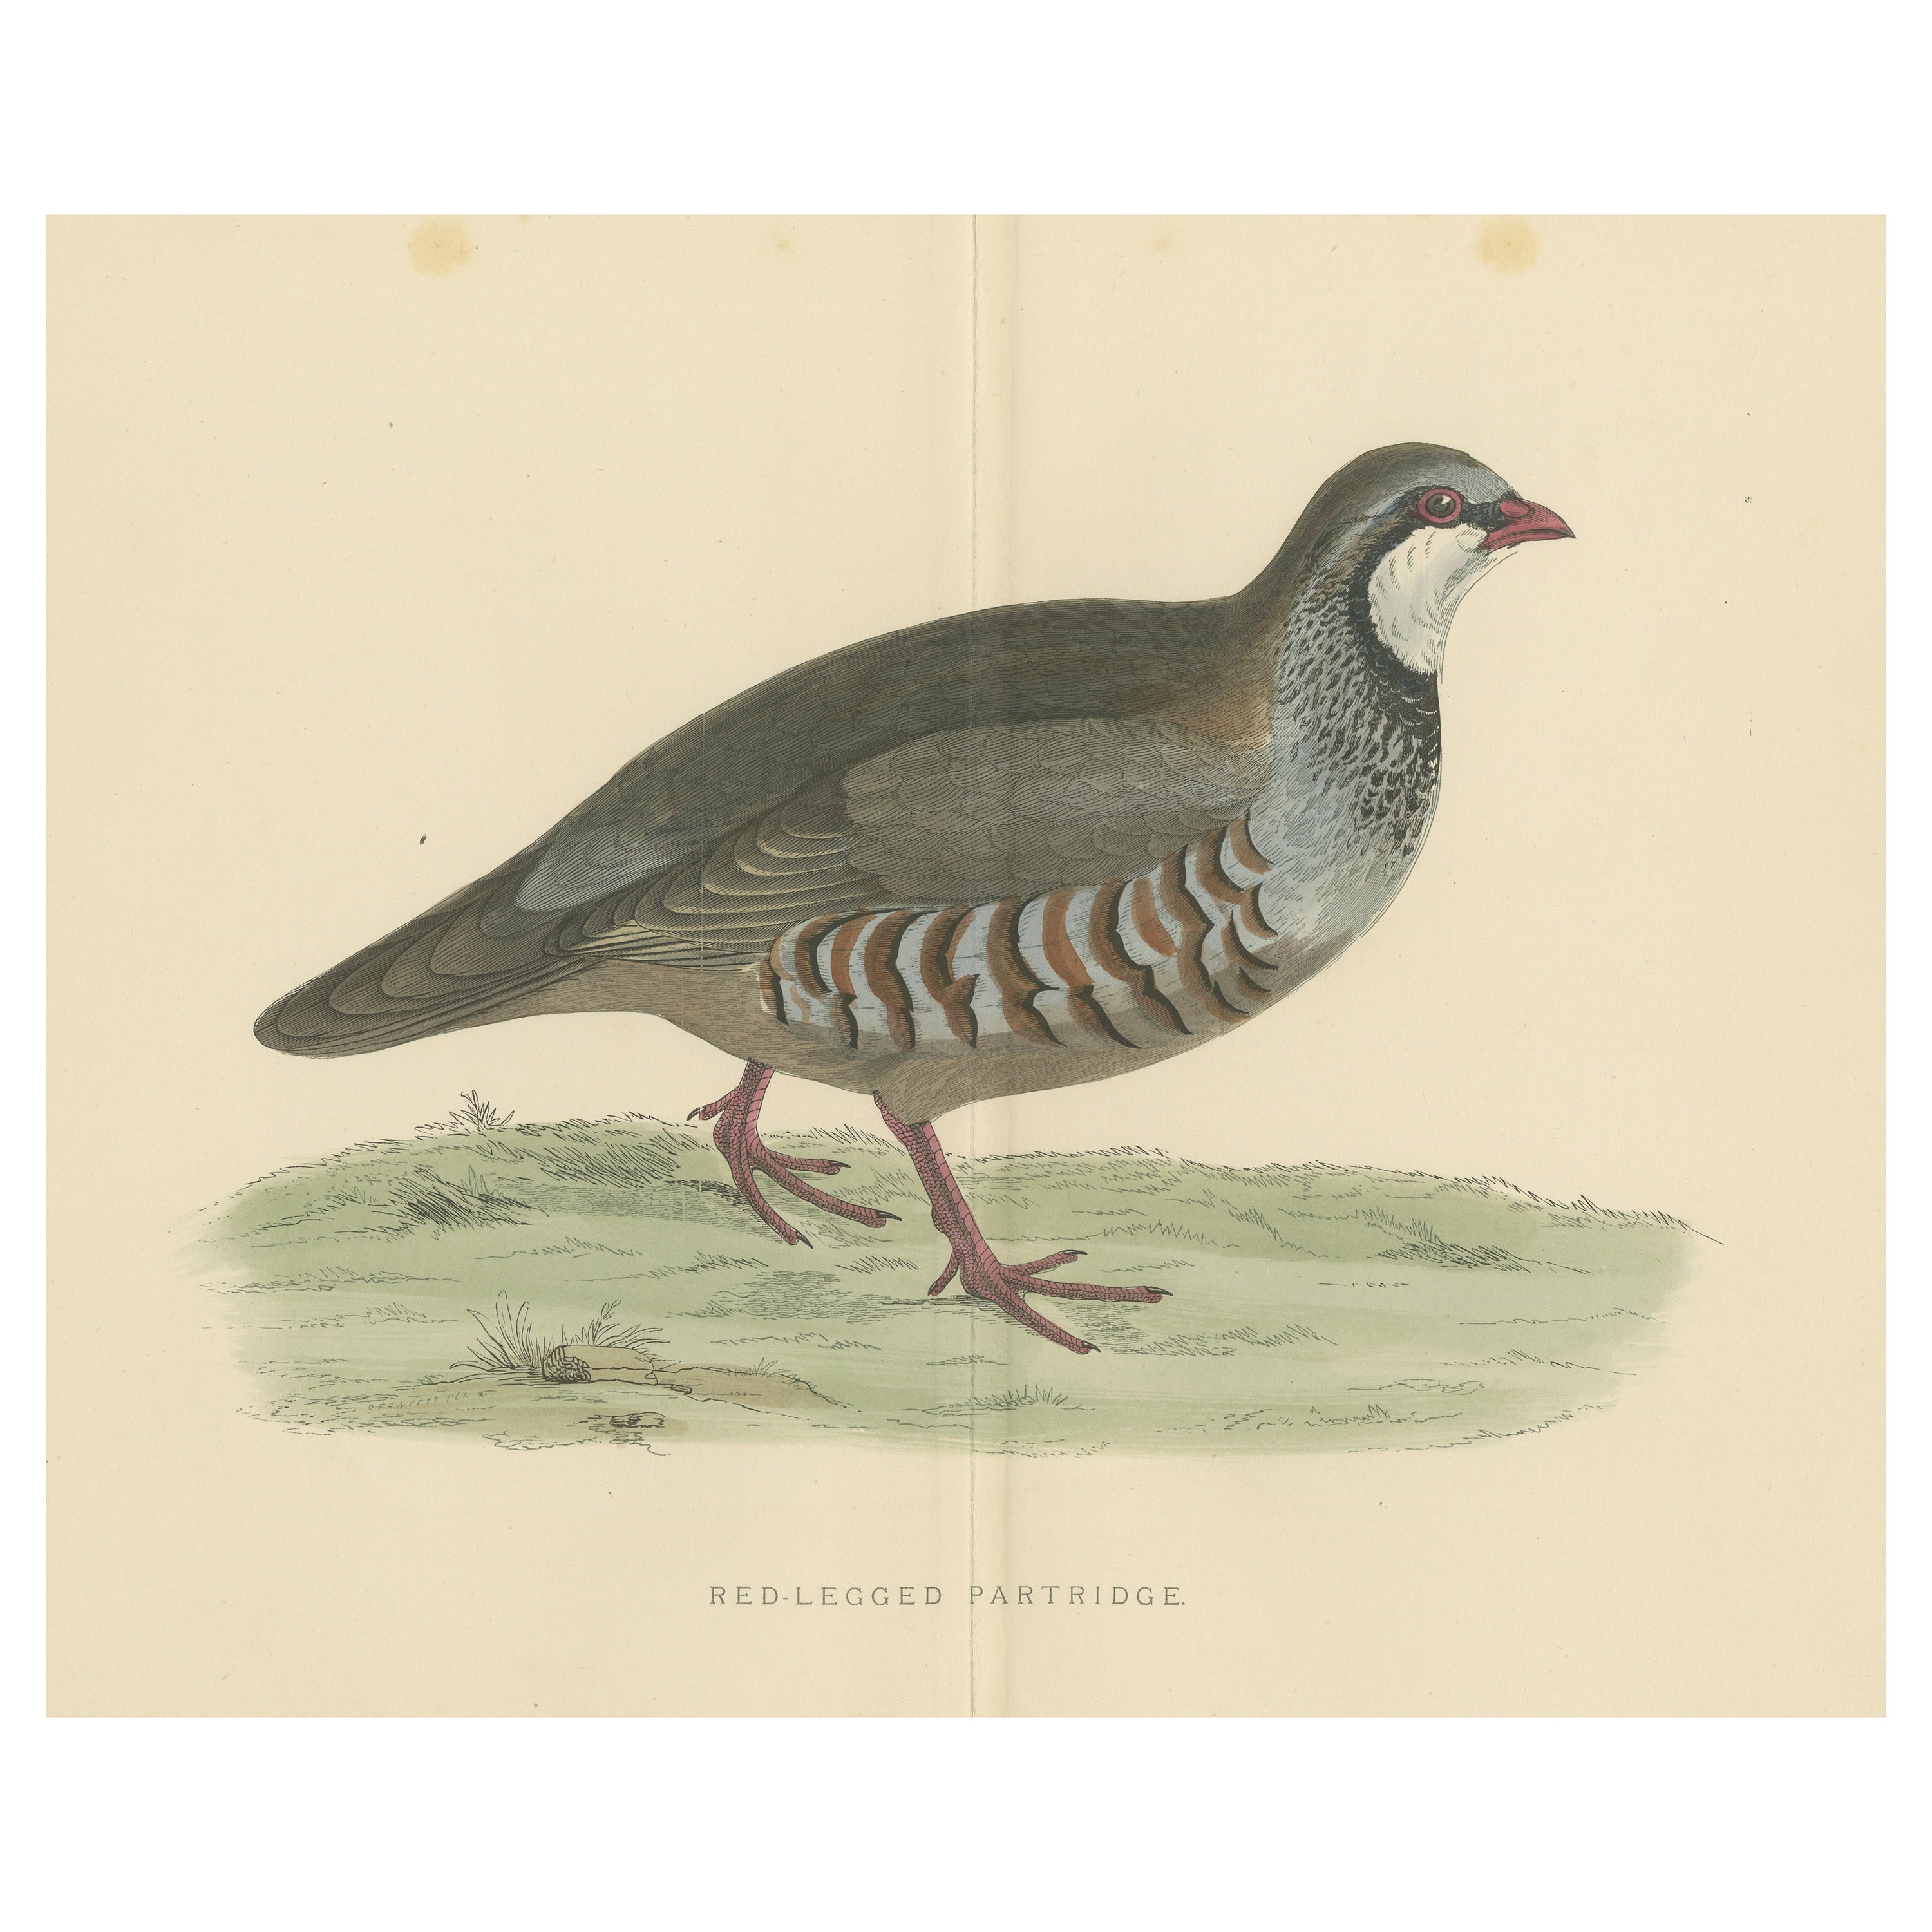 Original Antique Print of a Red-Legged Partridge 'with Centre Fold' For Sale